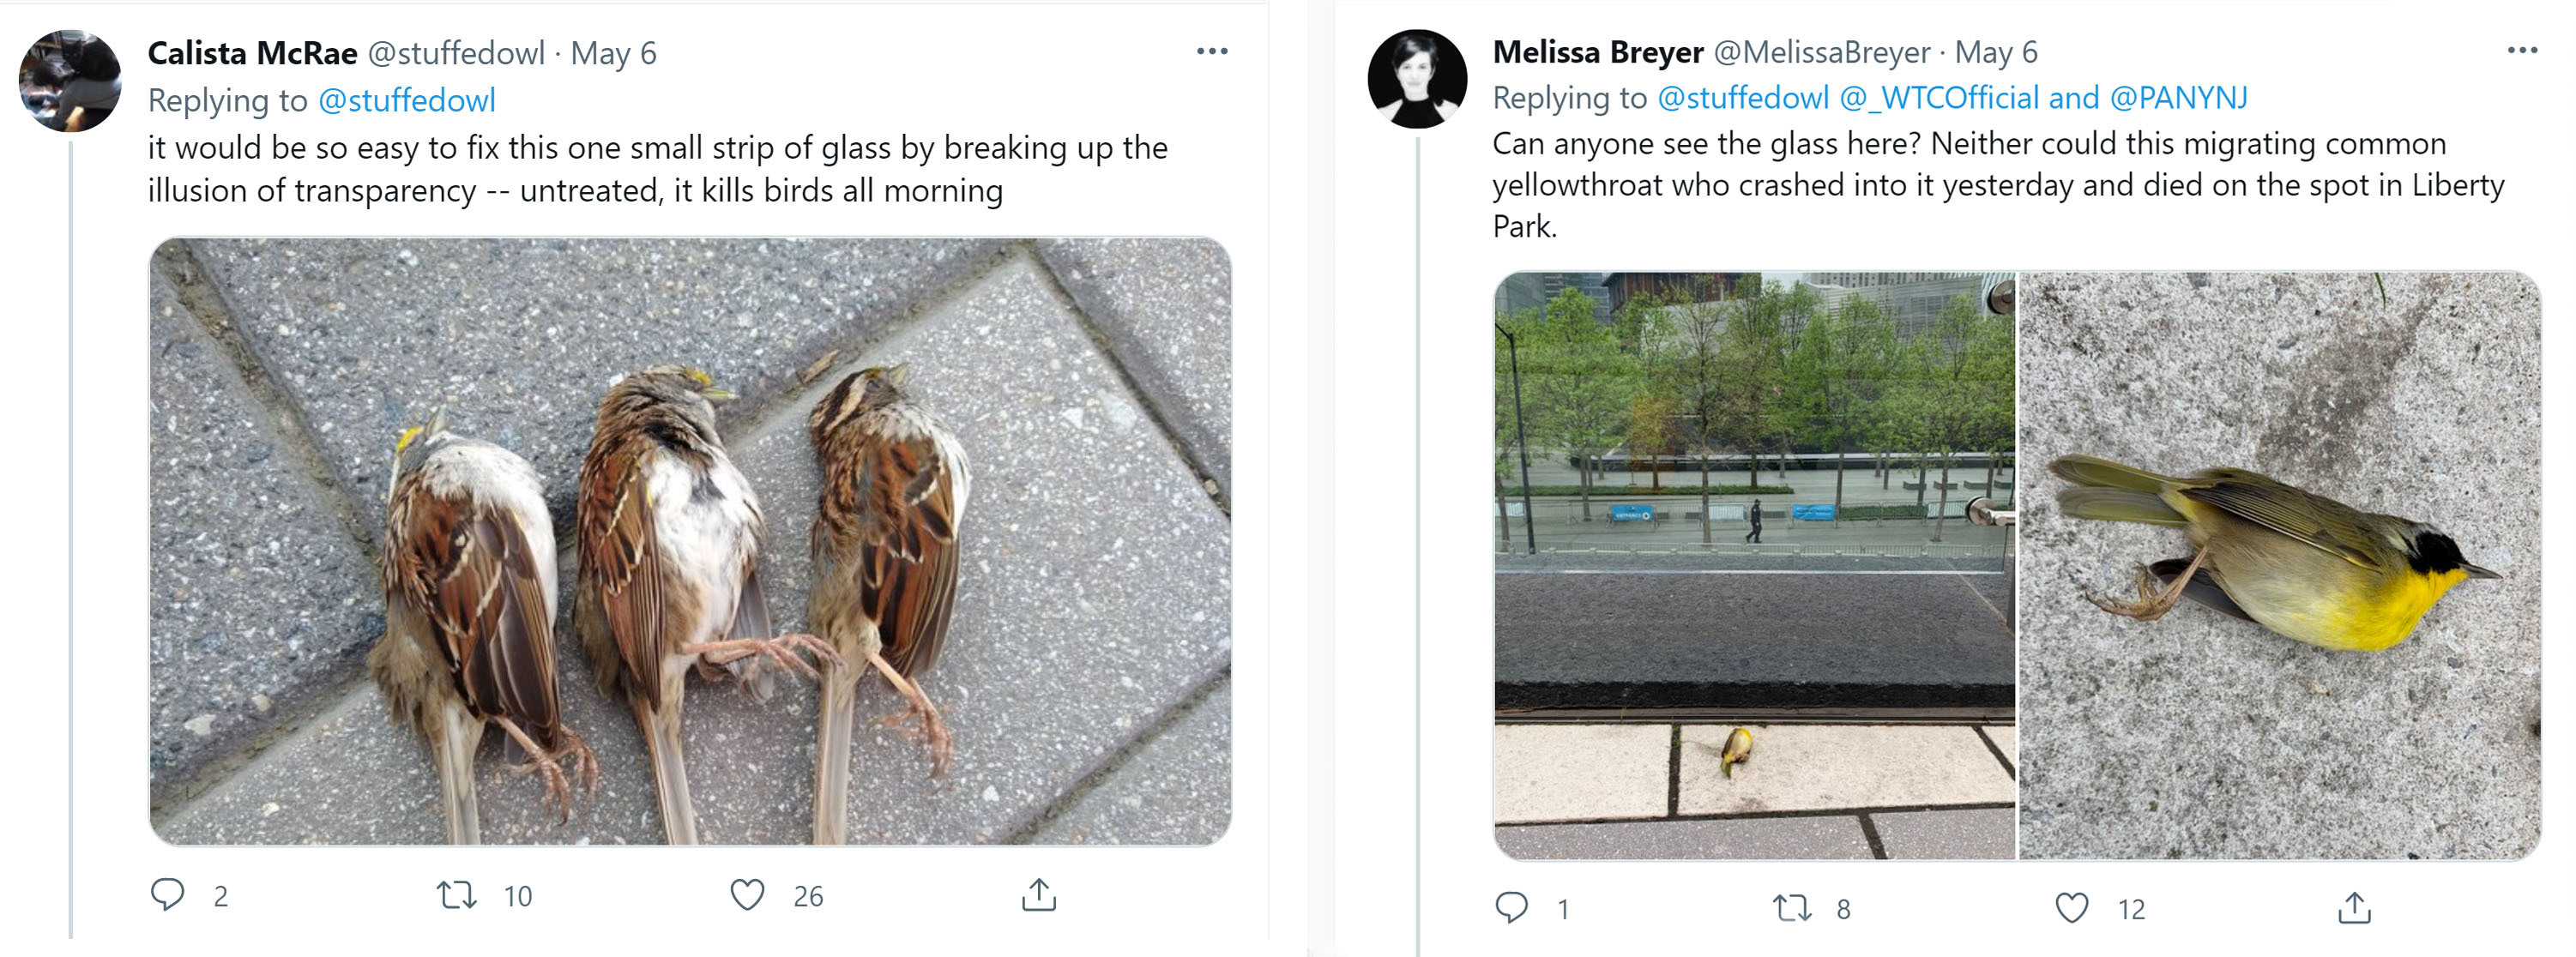 Tweets from Calista McRae (showing three White-throated Sparrows) and Melissa Breyer last spring brought needed attention to the preventable deaths of songbirds at Liberty Park.